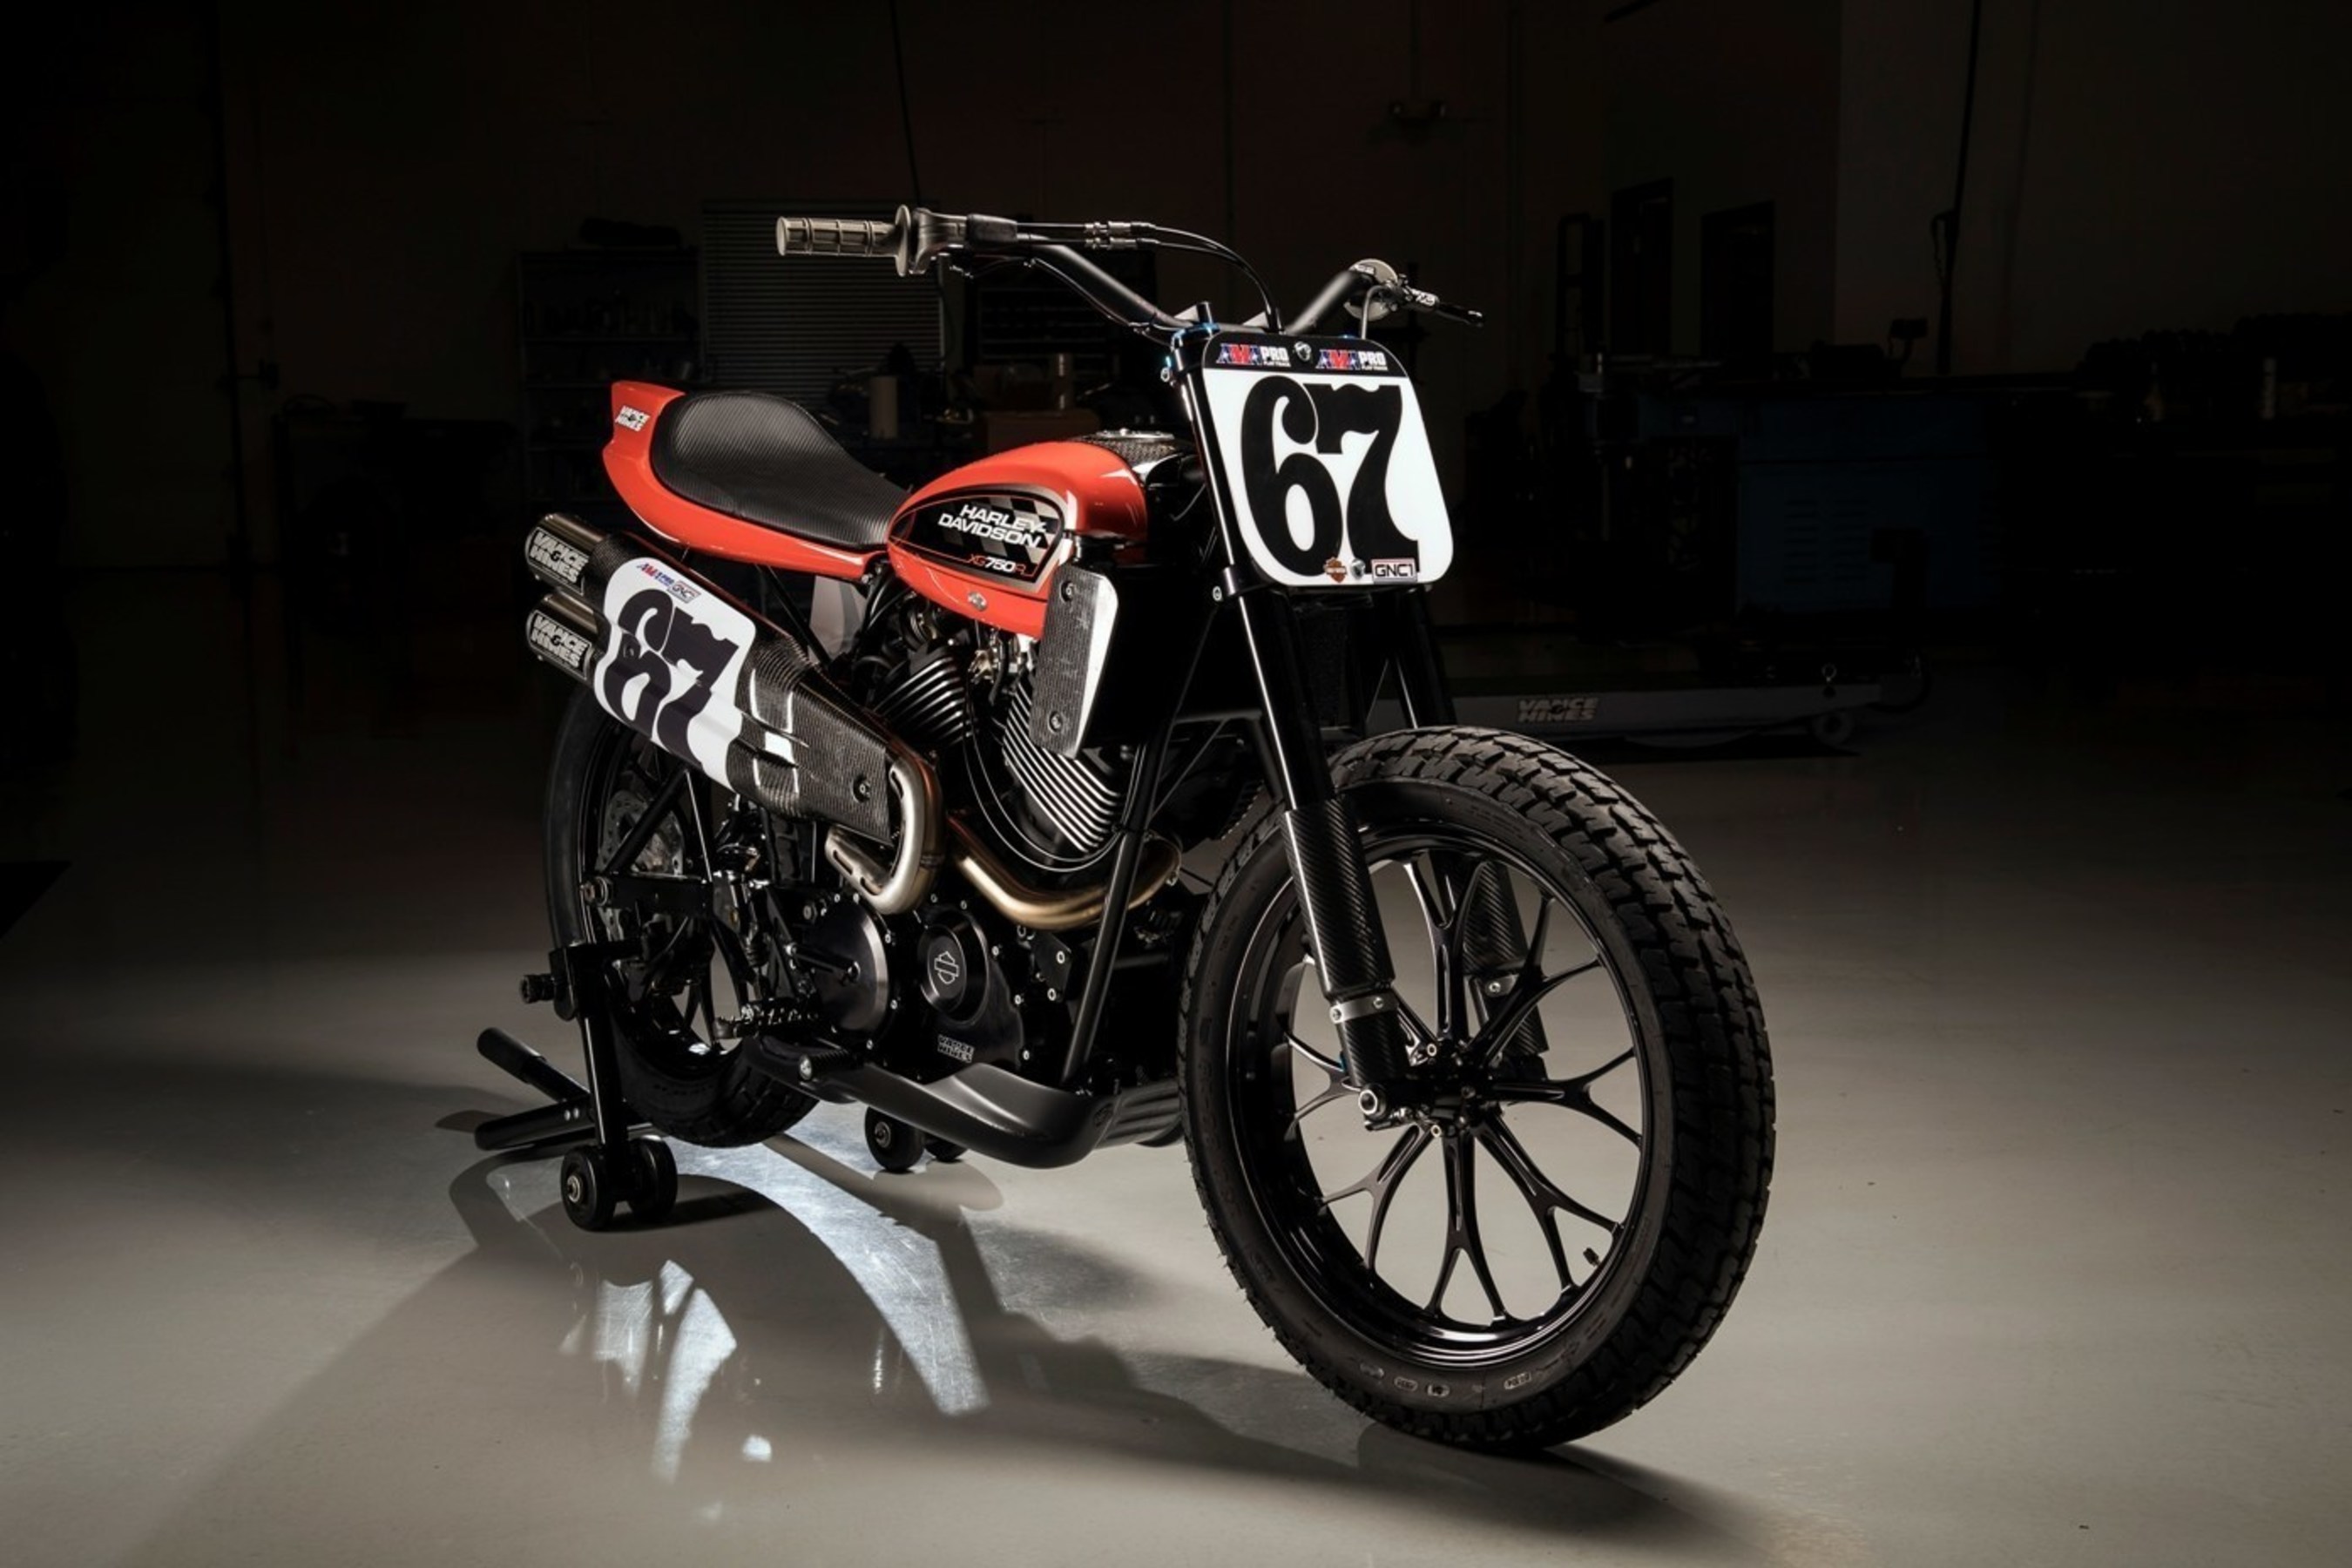 A new-generation Harley-Davidson flat-track motorcycle is ready to race. Harley-Davidson has unleashed its new flat track race bike, the XG750R, its first all-new flat track race bike in 44 years, to battle the fierce, adrenaline-filled competition of dirt tracks across the U.S.